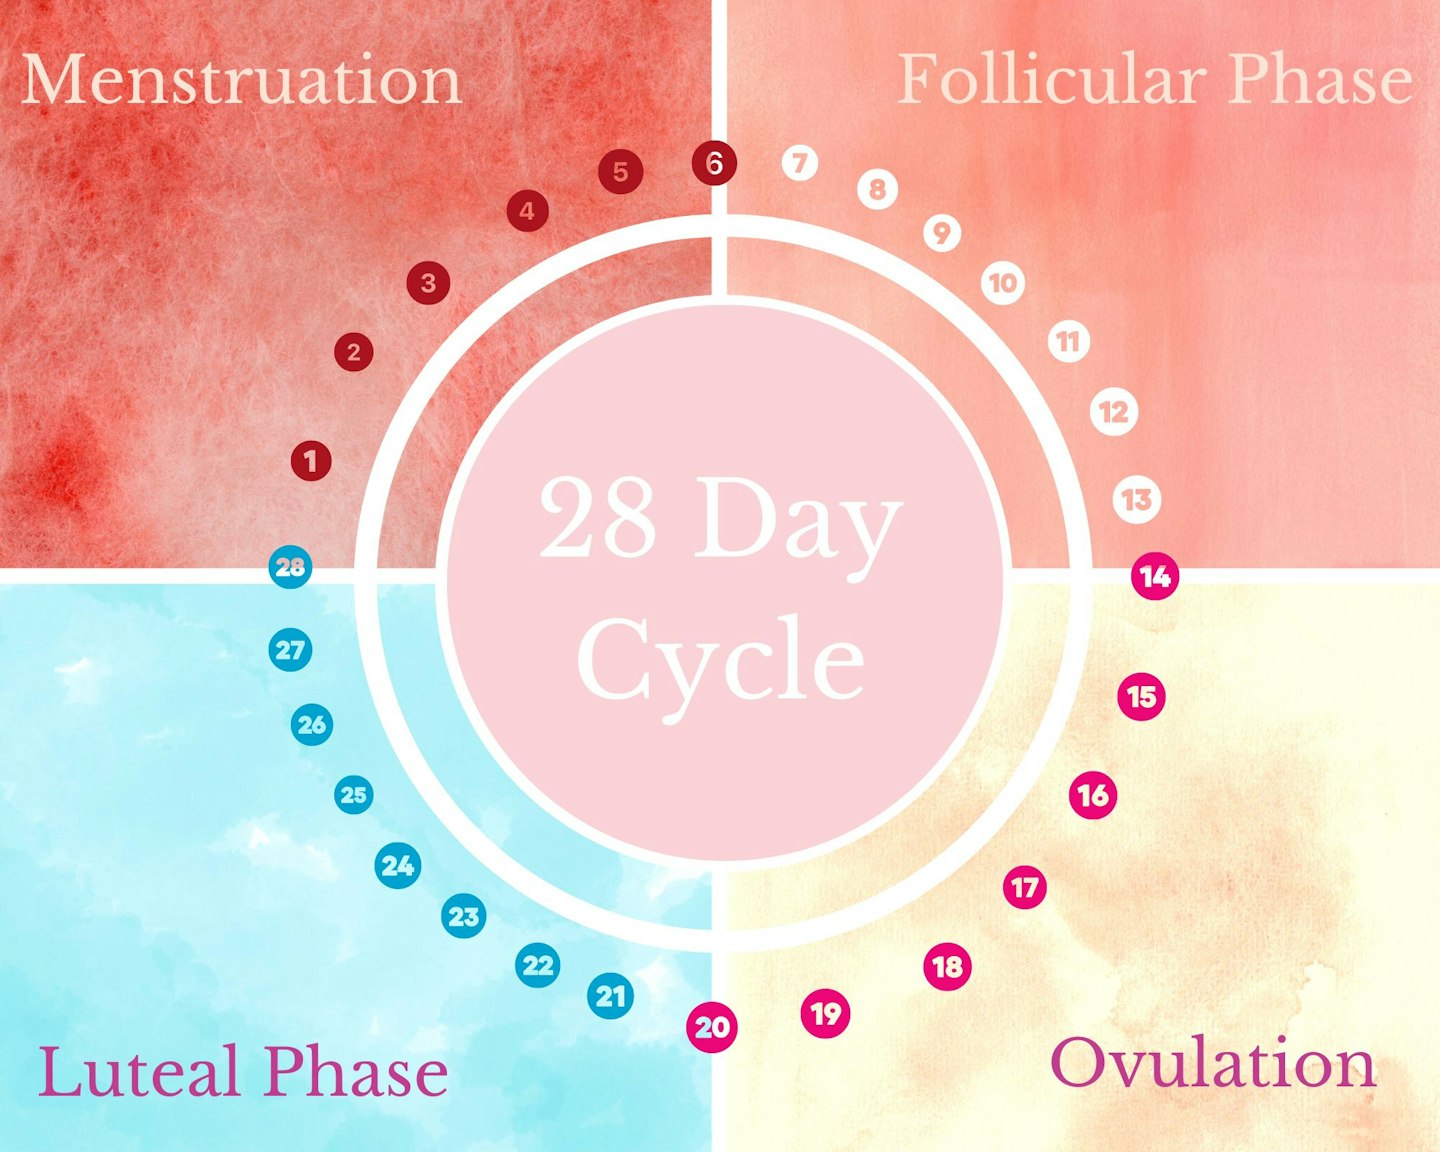 Can I get pregnant on the 23rd day after my period? My cycle is 32